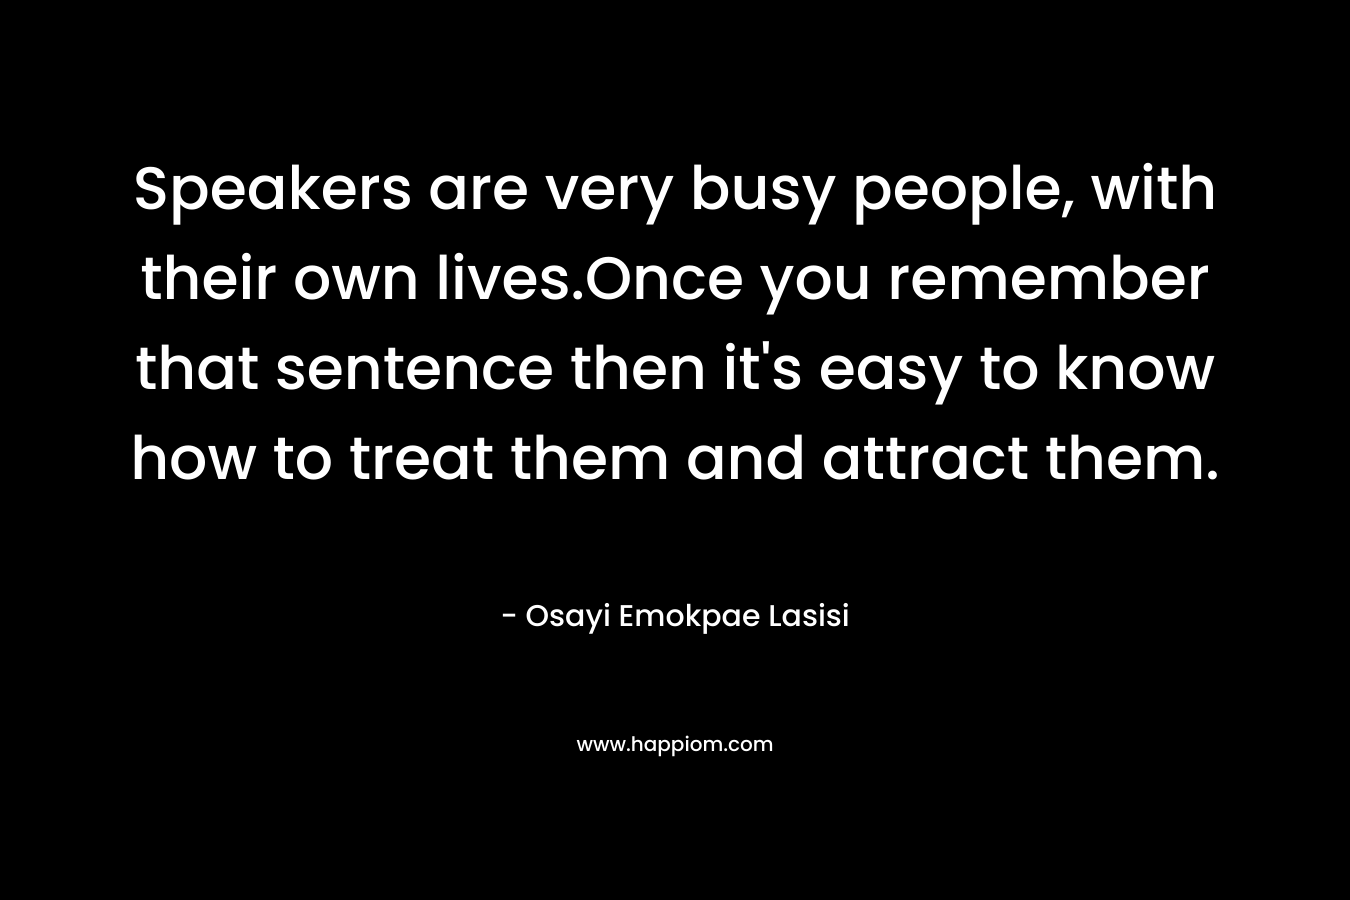 Speakers are very busy people, with their own lives.Once you remember that sentence then it's easy to know how to treat them and attract them.